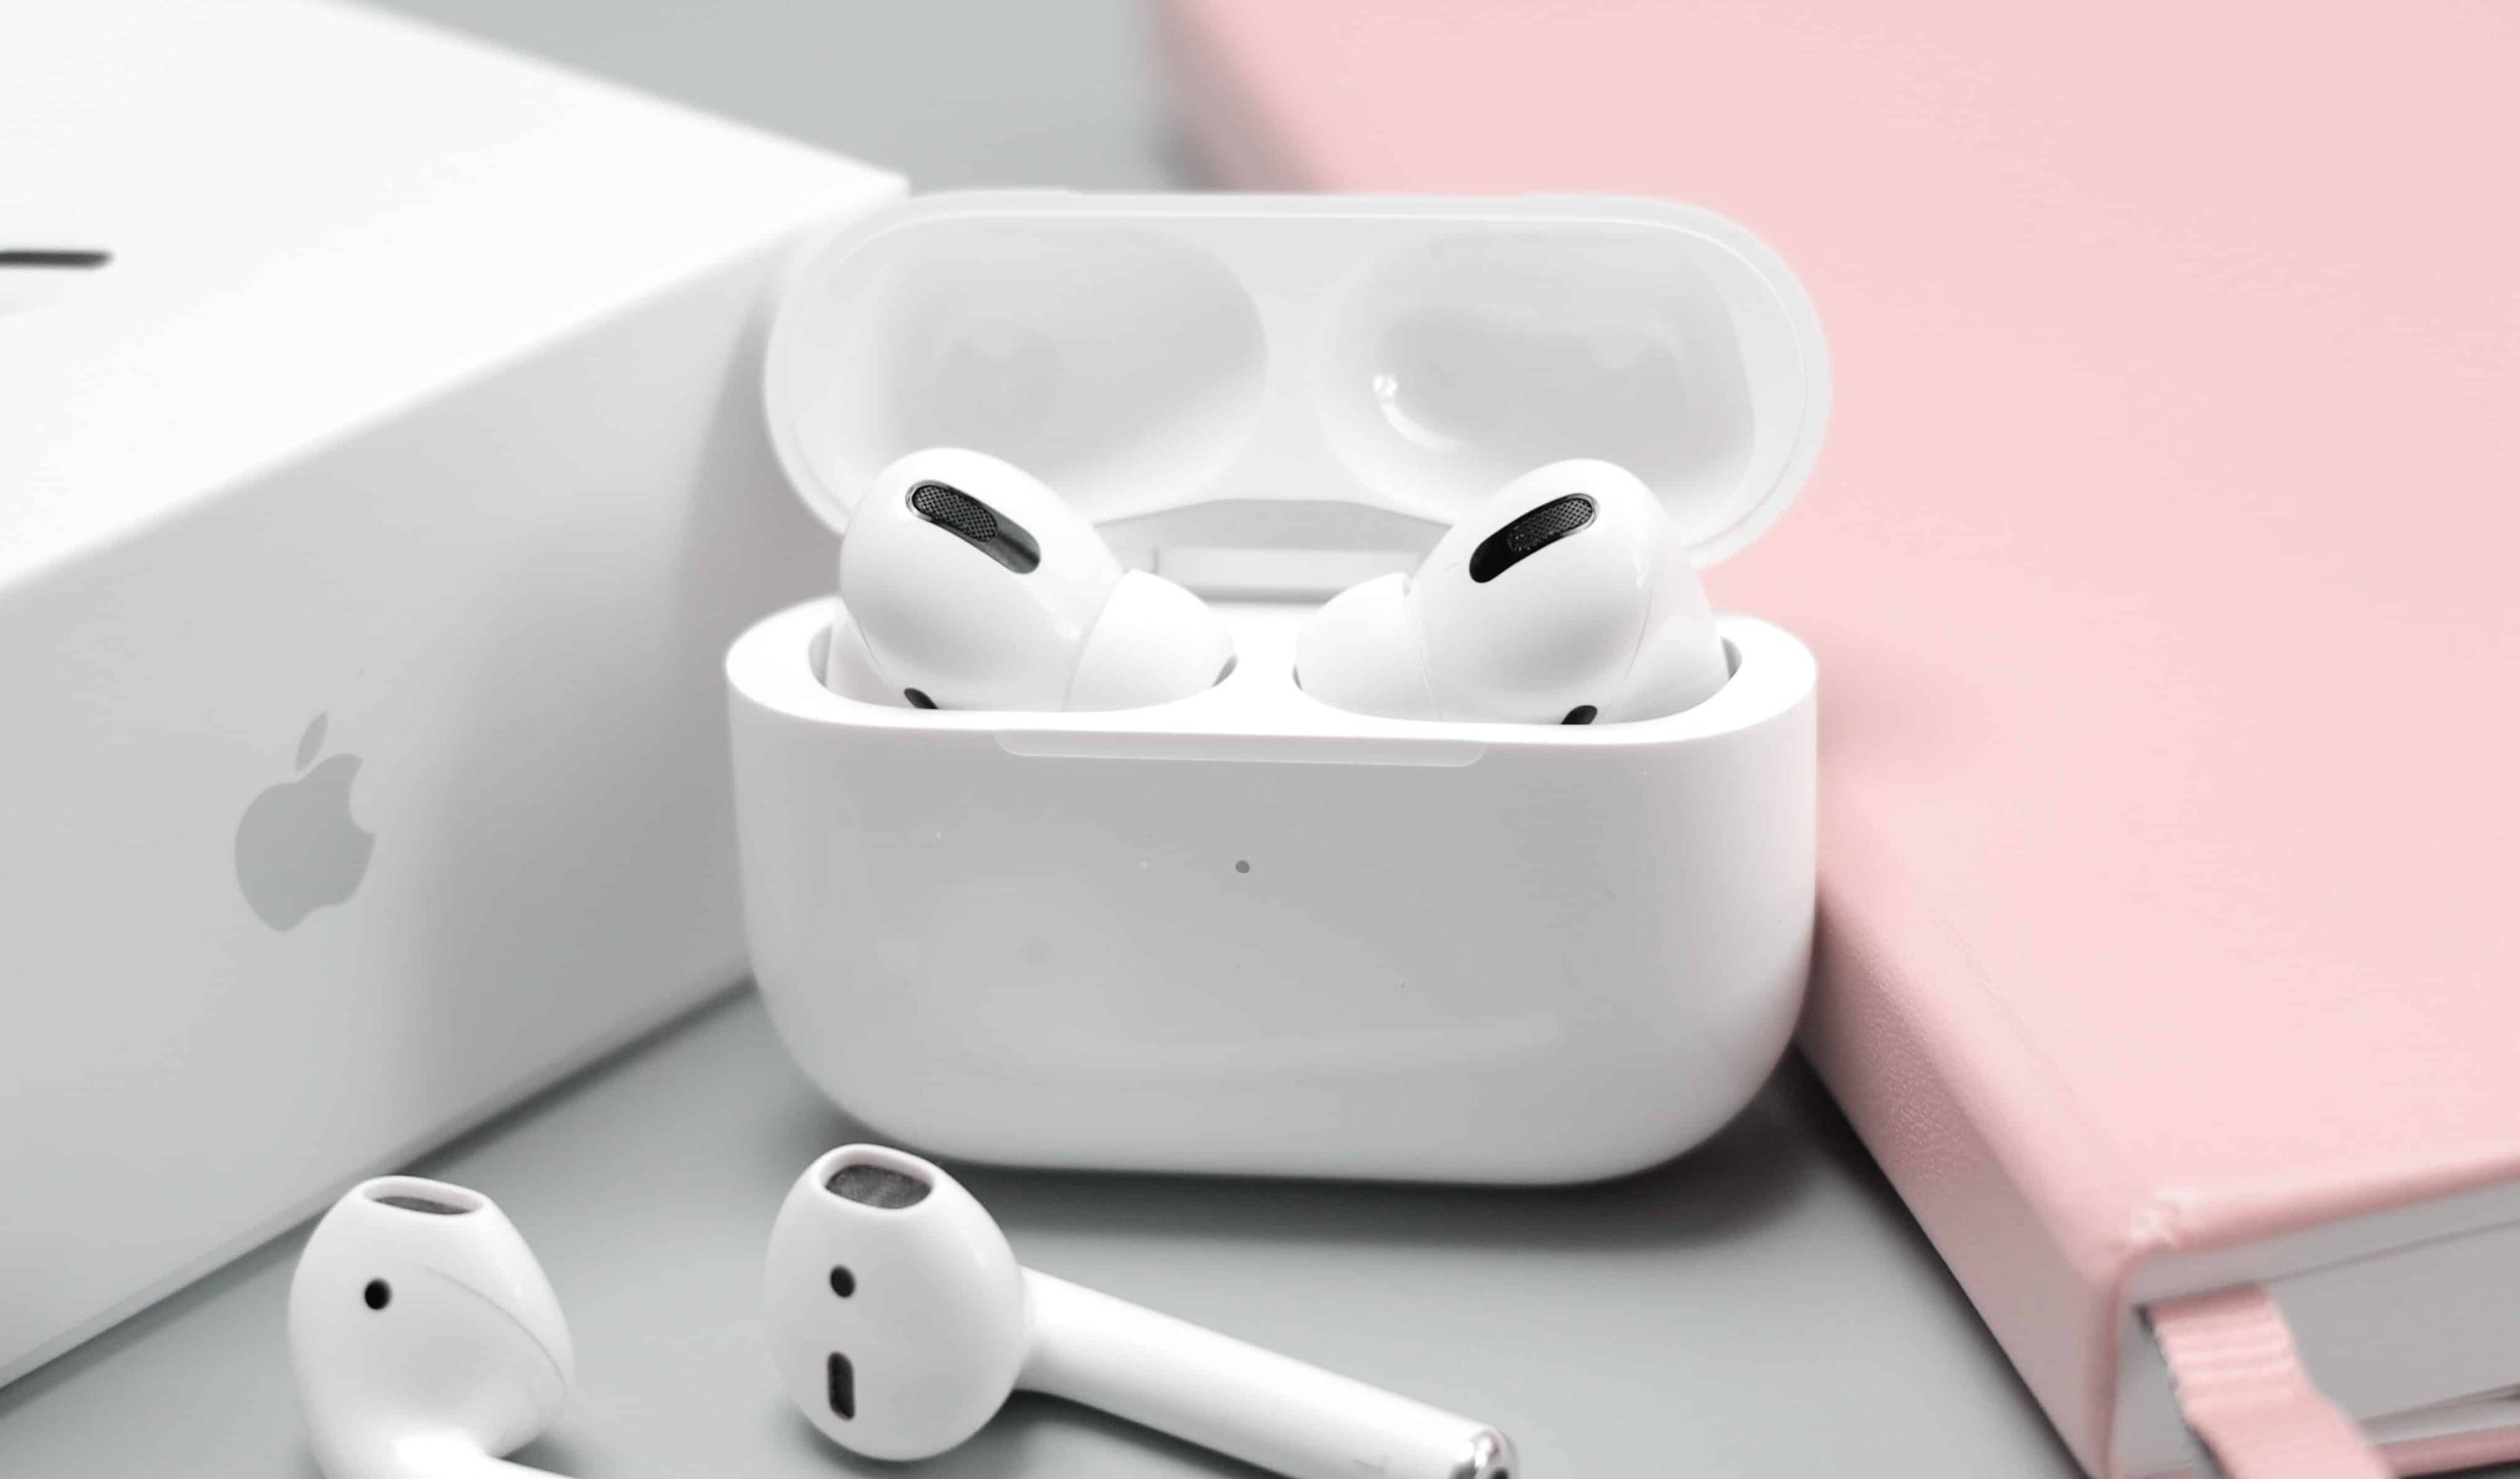 Apple faces lawsuit over AirPods alert volume